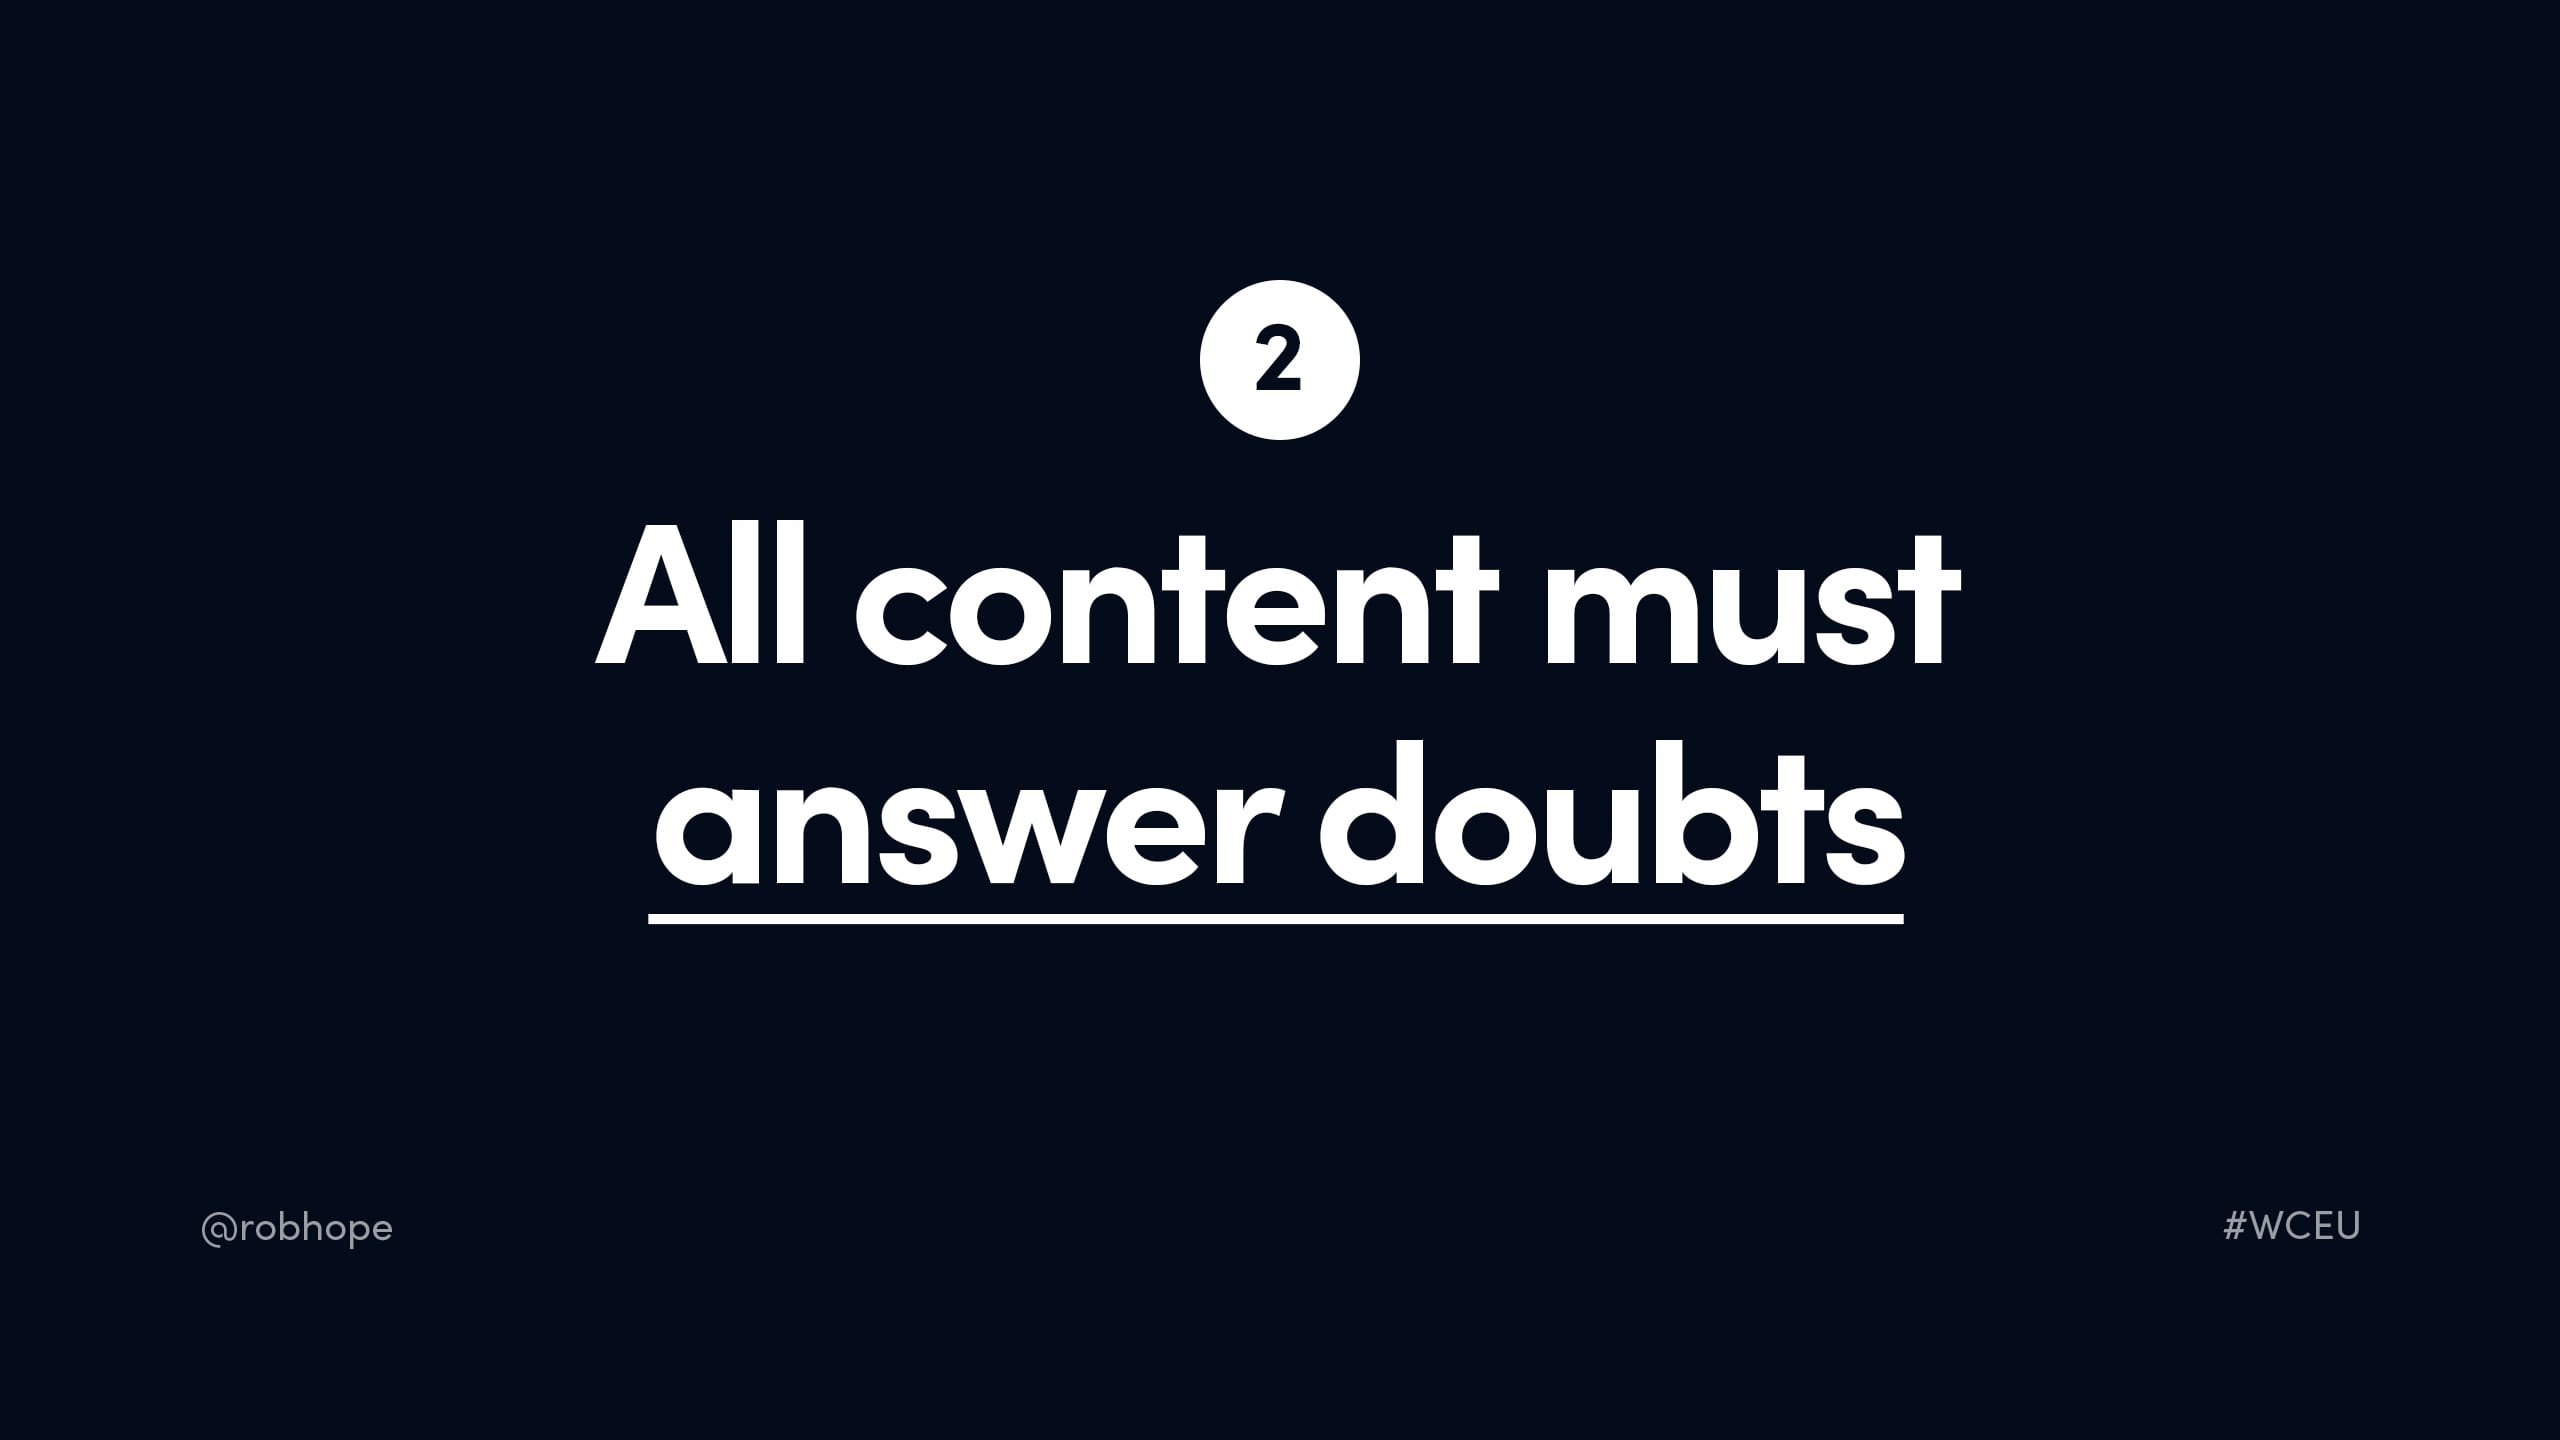 All content must answer doubts